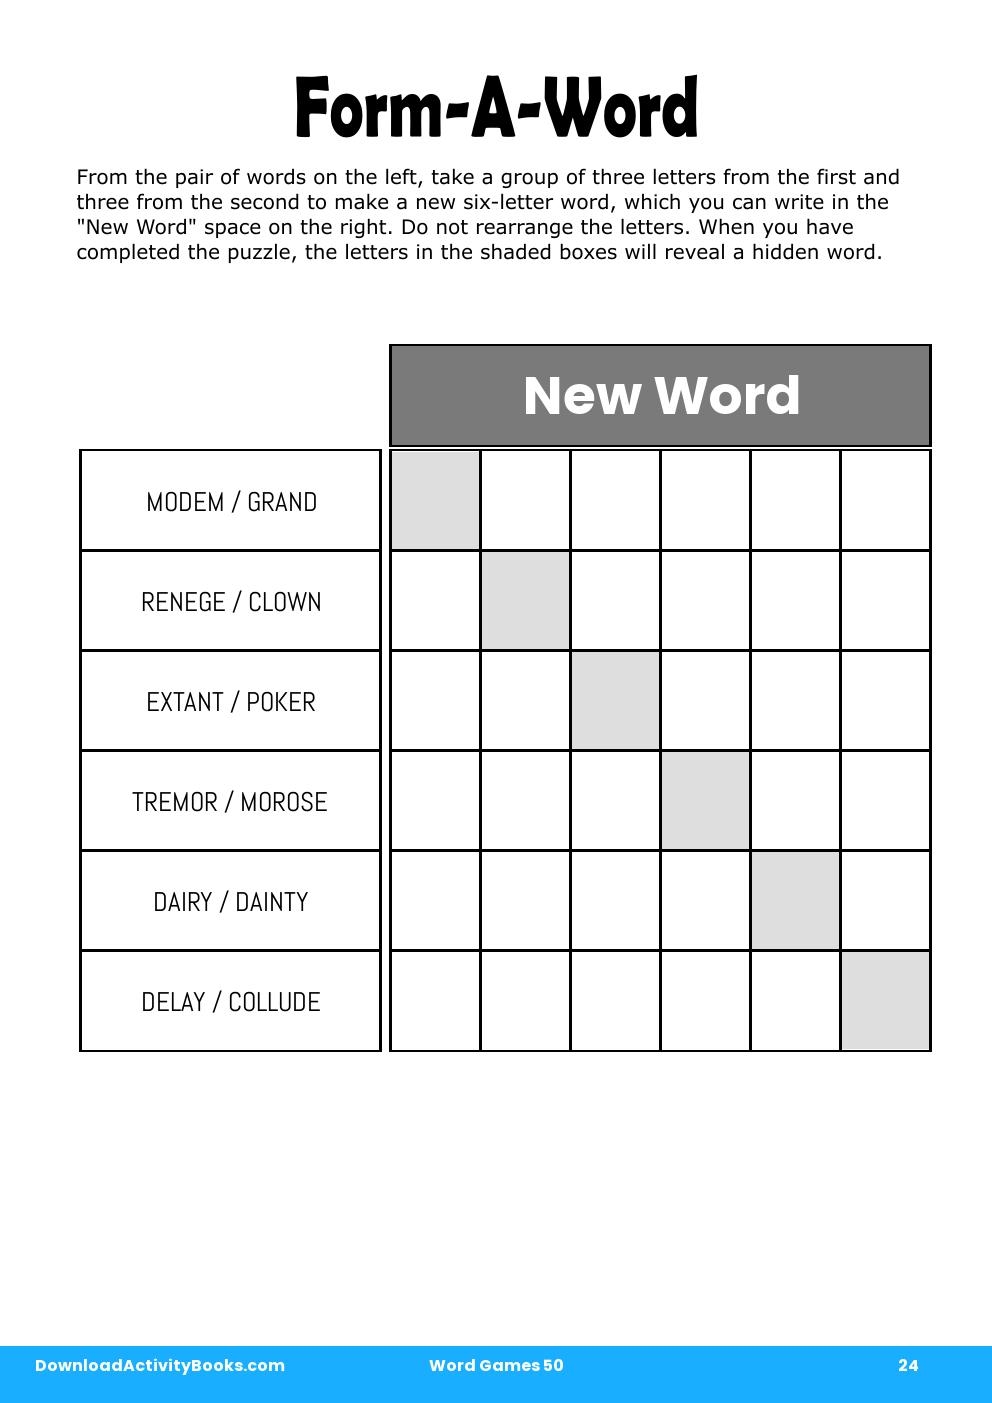 Form-A-Word in Word Games 50